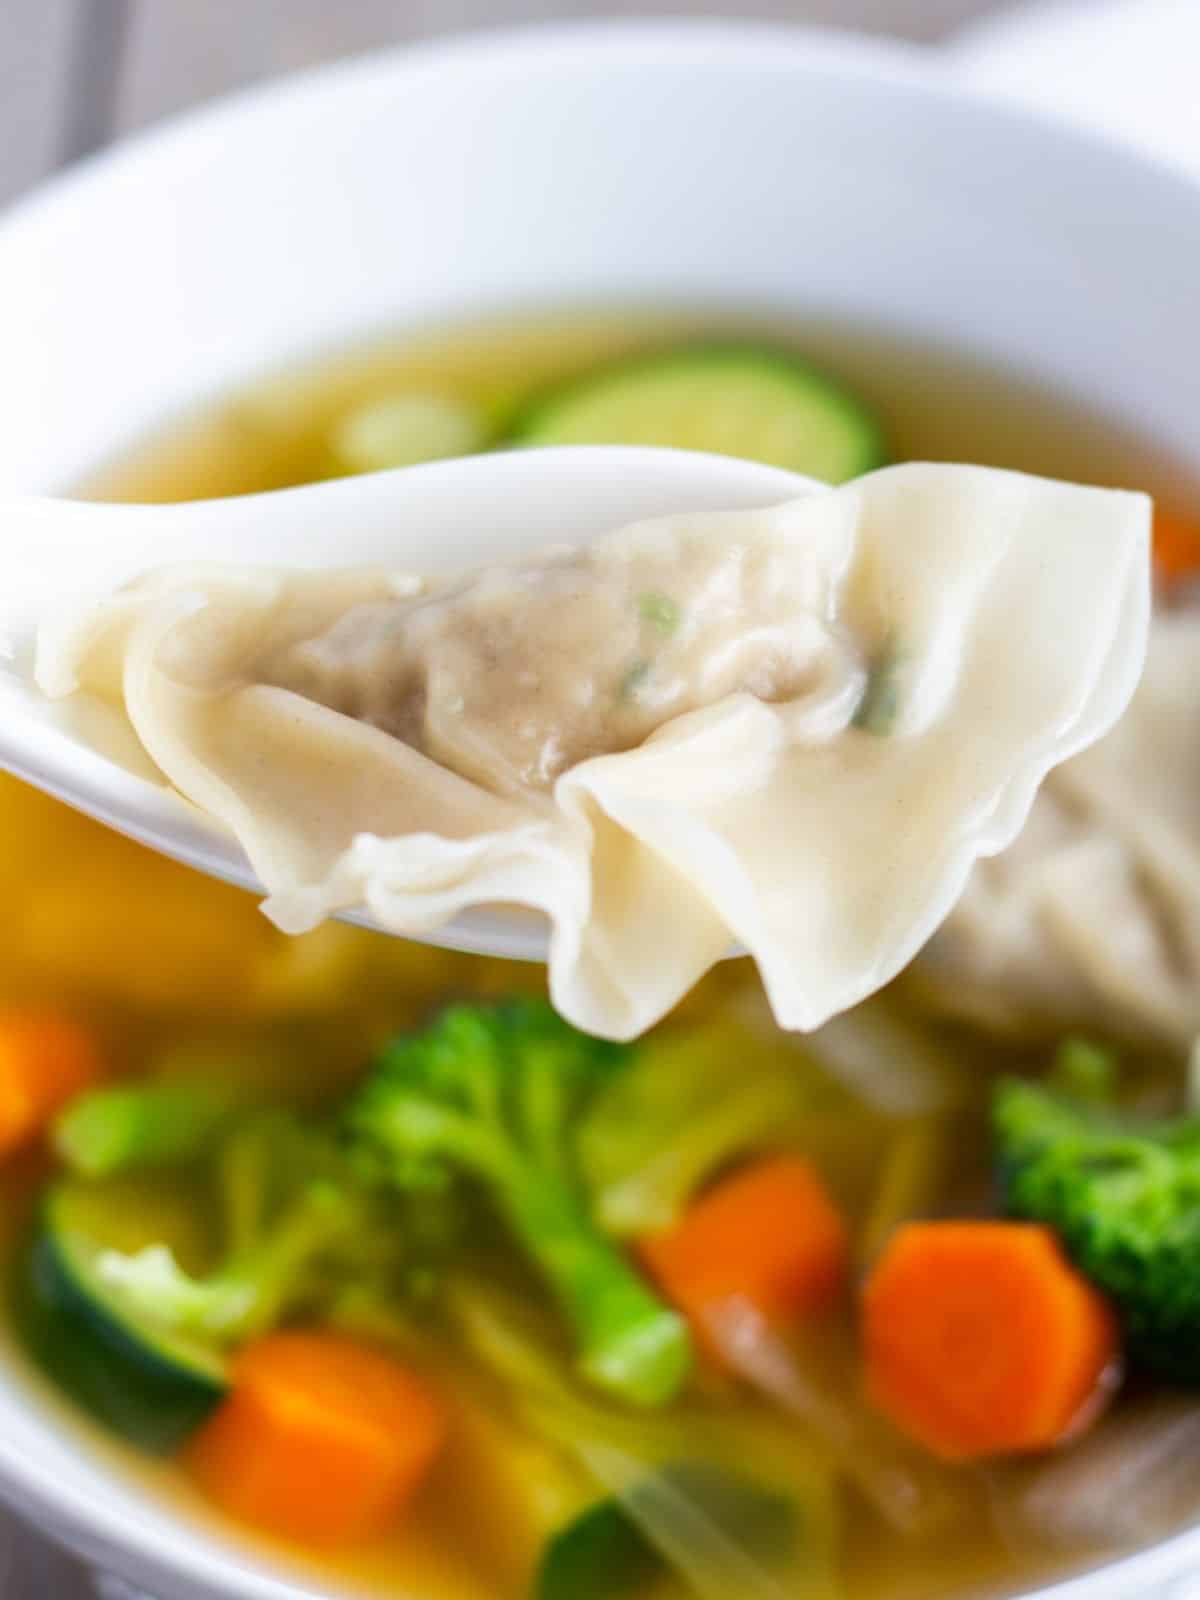 A soup spoon holding a cooked wonton over a bowl of soup.